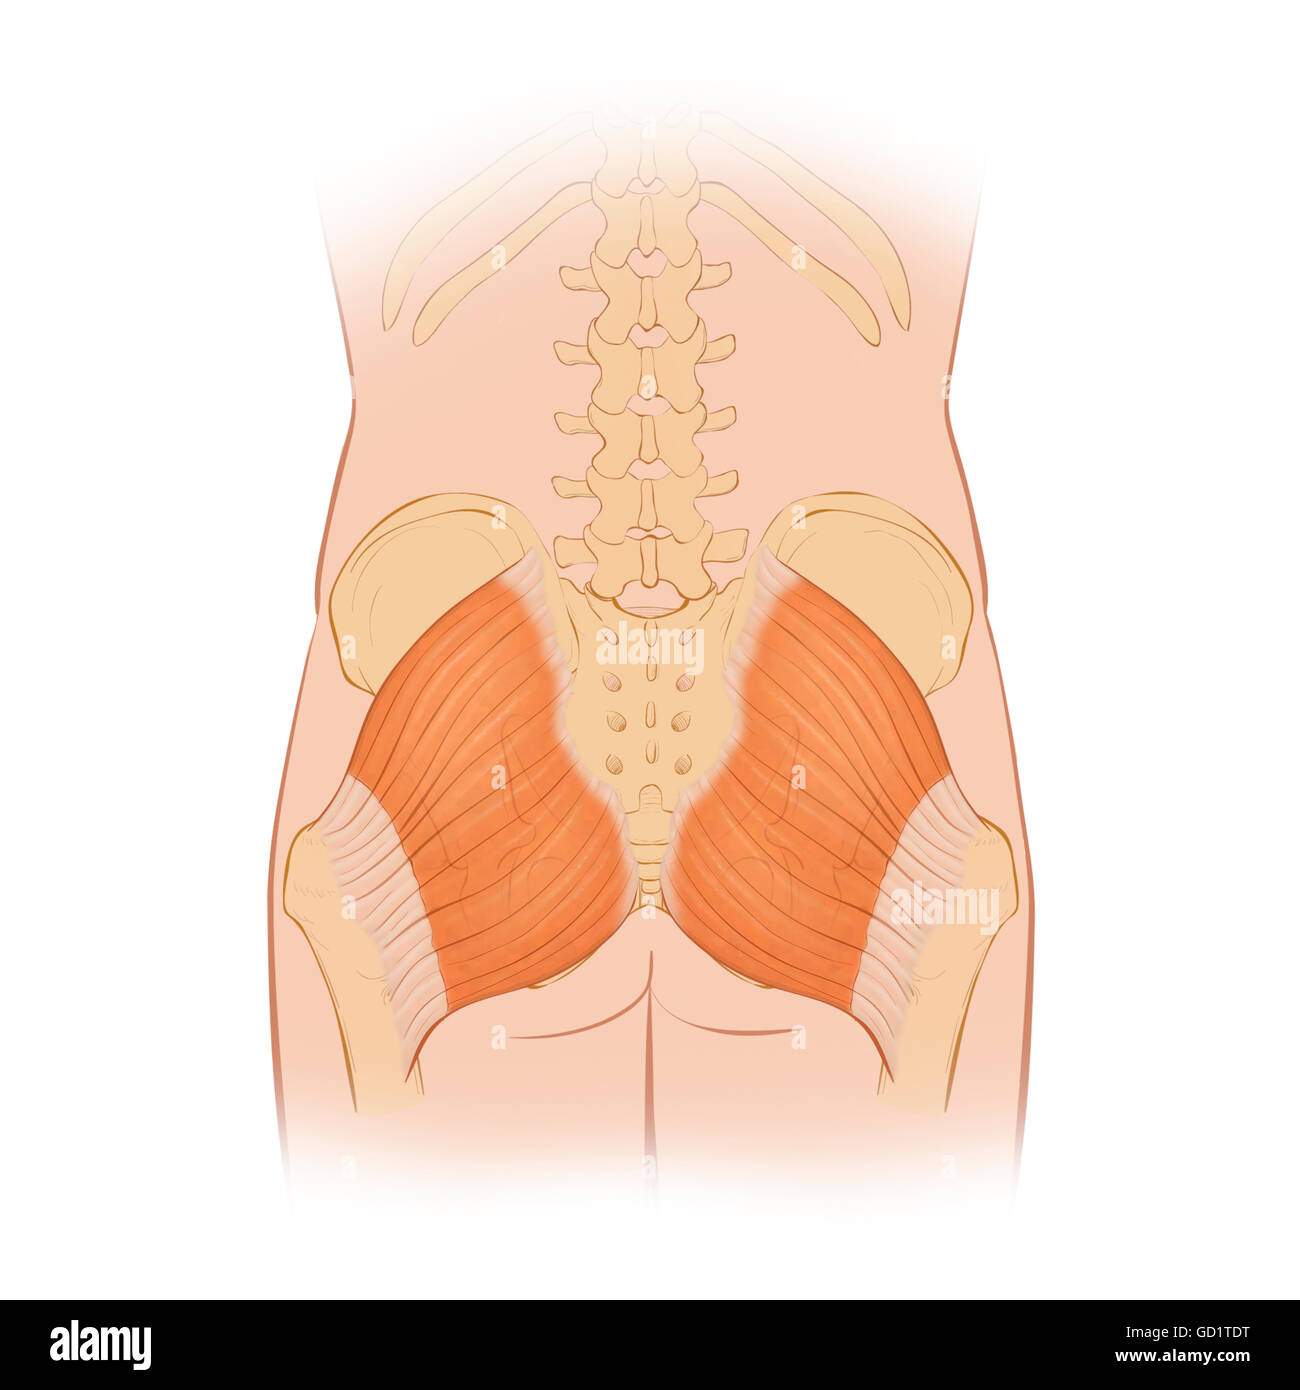 Normal posterior view of the hip bones and gluteus maximus muscle including the lumbar vertebra Stock Photo